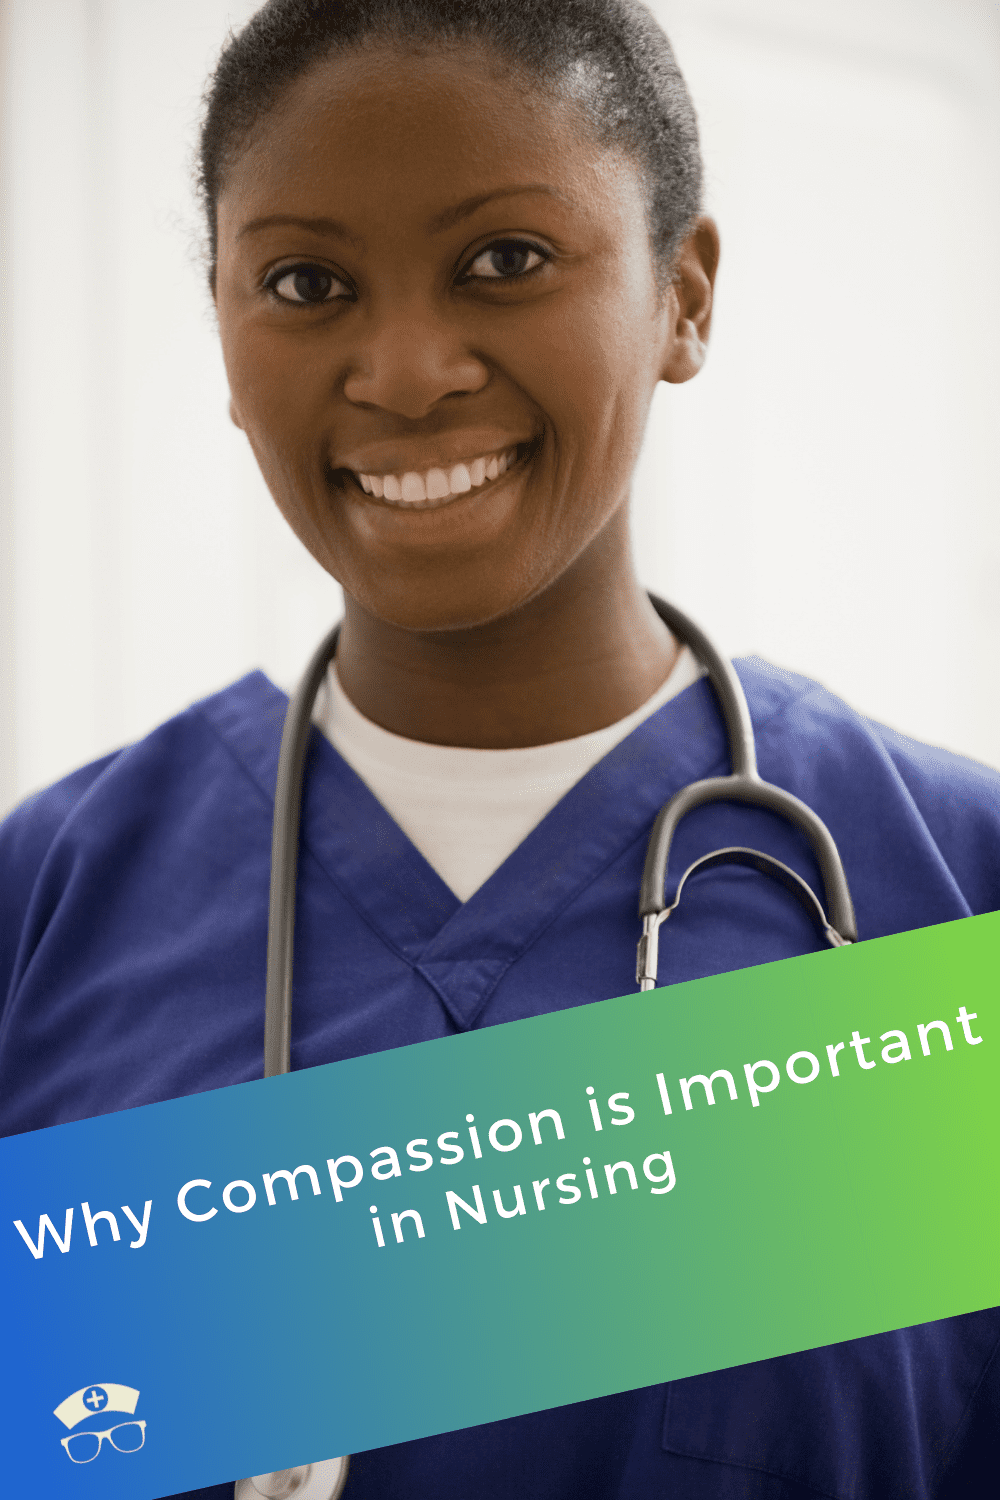 Why Is Compassion Important In Nursing